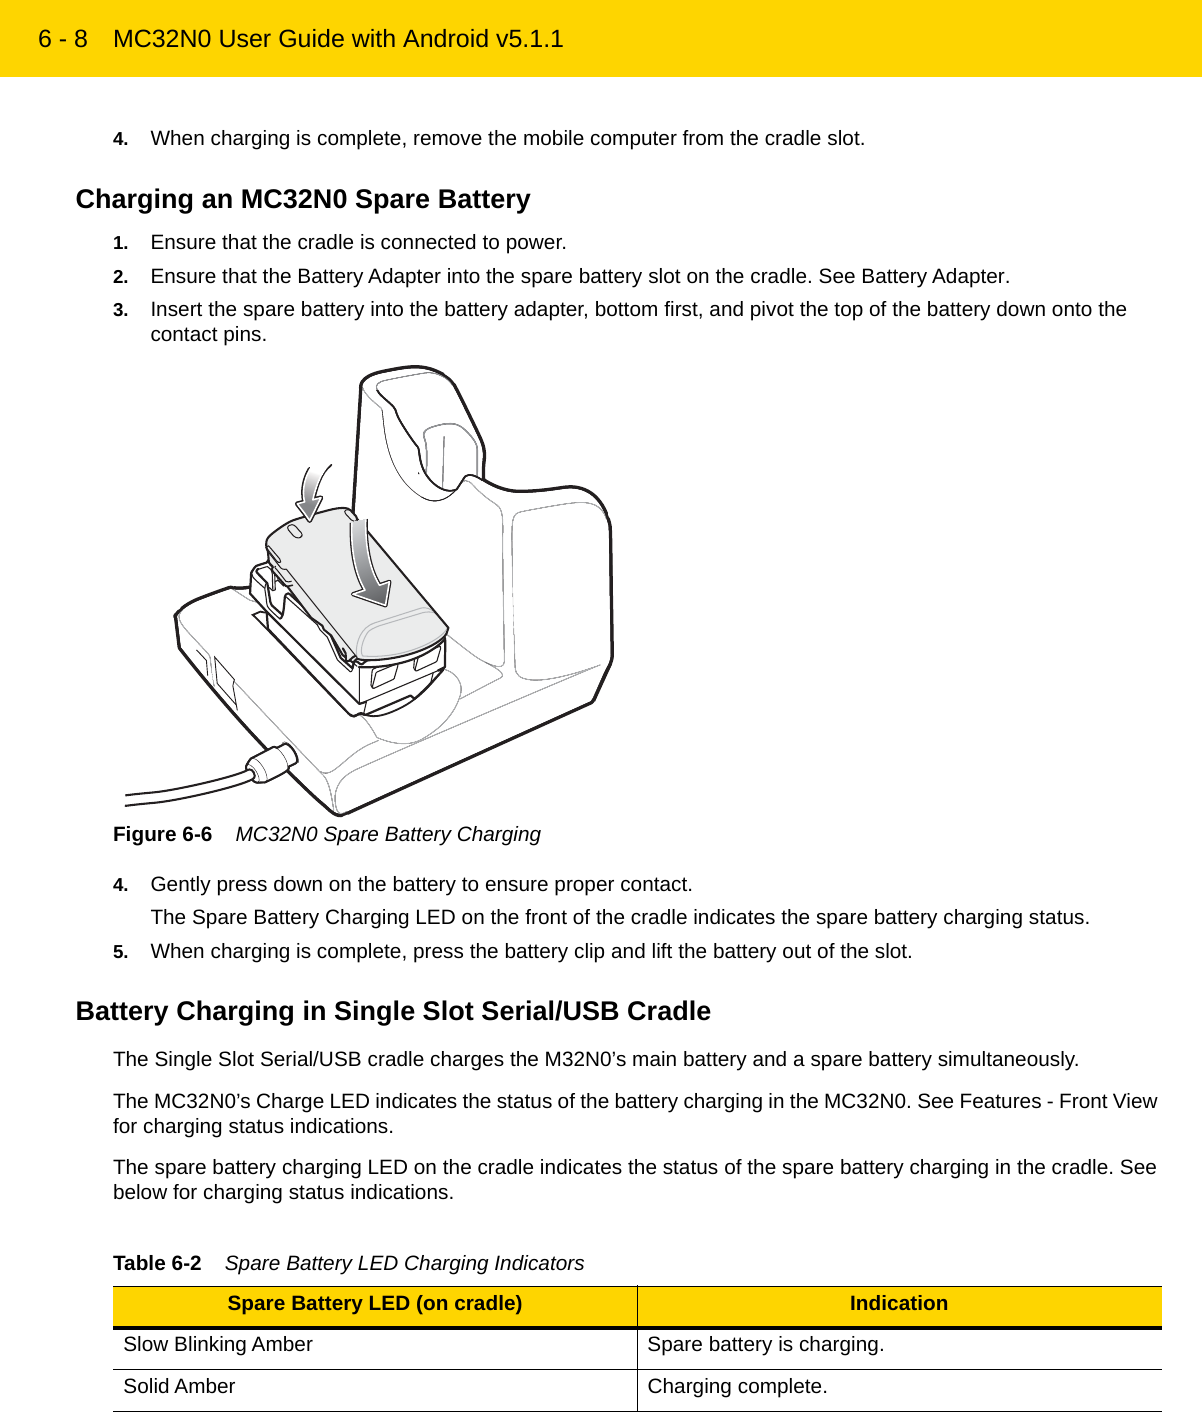 6 - 8 MC32N0 User Guide with Android v5.1.14. When charging is complete, remove the mobile computer from the cradle slot.Charging an MC32N0 Spare Battery1. Ensure that the cradle is connected to power.2. Ensure that the Battery Adapter into the spare battery slot on the cradle. See Battery Adapter.3. Insert the spare battery into the battery adapter, bottom first, and pivot the top of the battery down onto the contact pins.Figure 6-6    MC32N0 Spare Battery Charging4. Gently press down on the battery to ensure proper contact.The Spare Battery Charging LED on the front of the cradle indicates the spare battery charging status.5. When charging is complete, press the battery clip and lift the battery out of the slot.Battery Charging in Single Slot Serial/USB CradleThe Single Slot Serial/USB cradle charges the M32N0’s main battery and a spare battery simultaneously.The MC32N0’s Charge LED indicates the status of the battery charging in the MC32N0. See Features - Front View for charging status indications.The spare battery charging LED on the cradle indicates the status of the spare battery charging in the cradle. See below for charging status indications.Table 6-2    Spare Battery LED Charging Indicators Spare Battery LED (on cradle) IndicationSlow Blinking Amber Spare battery is charging.Solid Amber Charging complete.REVIEW ONLY - REVIEW ONLY - REVIEW ONLY                             REVIEW ONLY - REVIEW ONLY - REVIEW ONLY